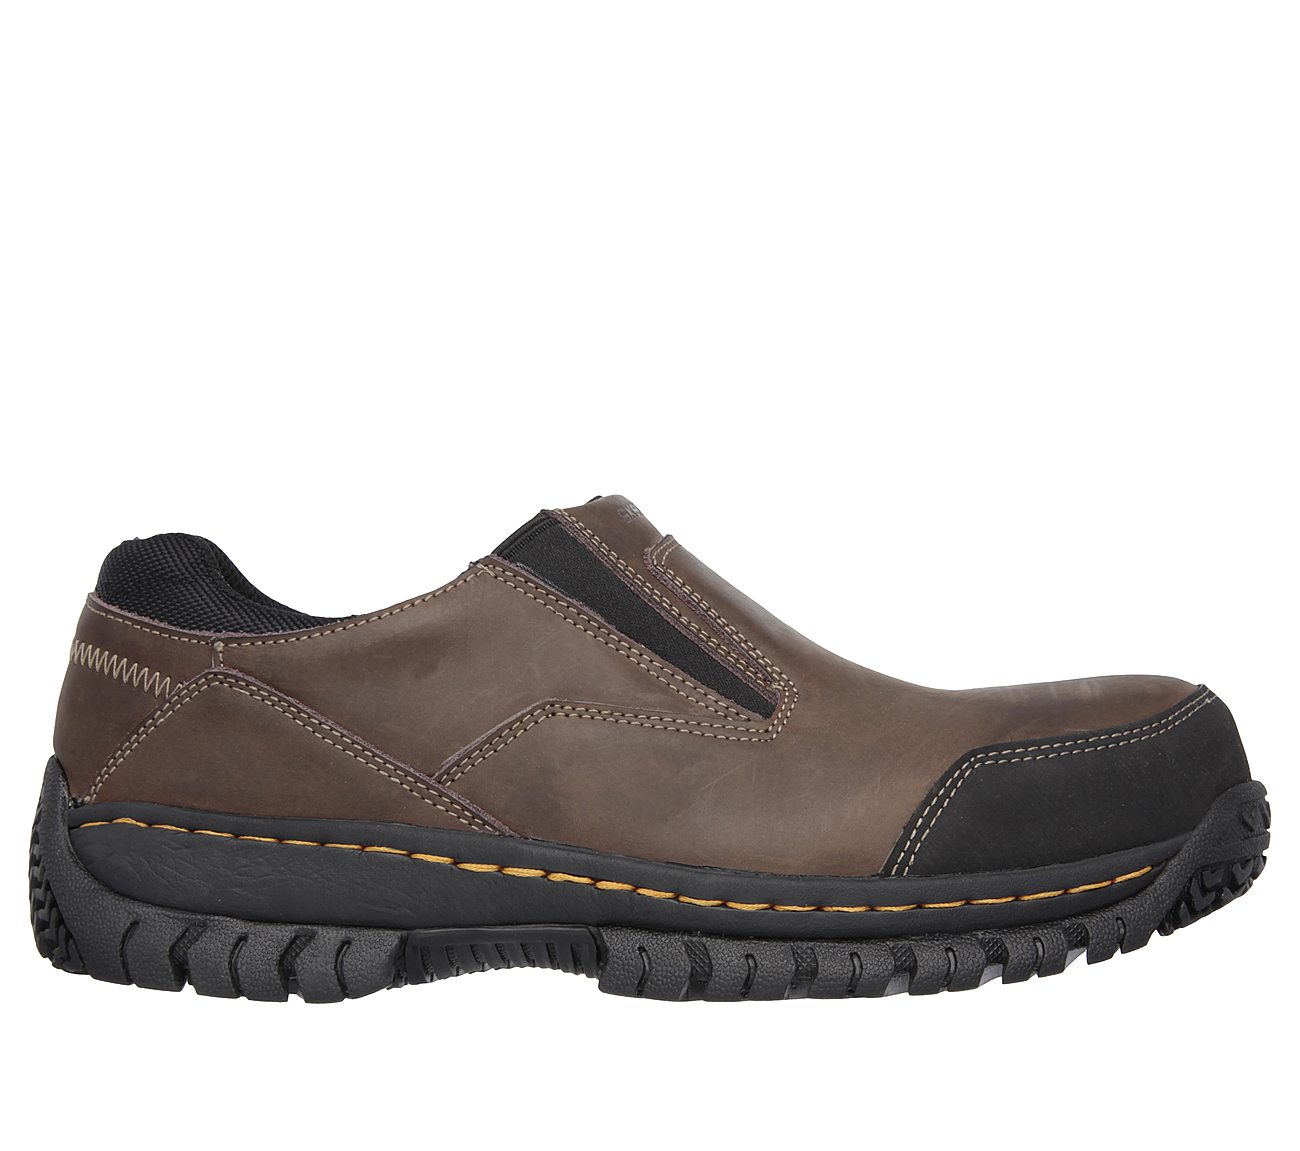 slip on leather work shoes